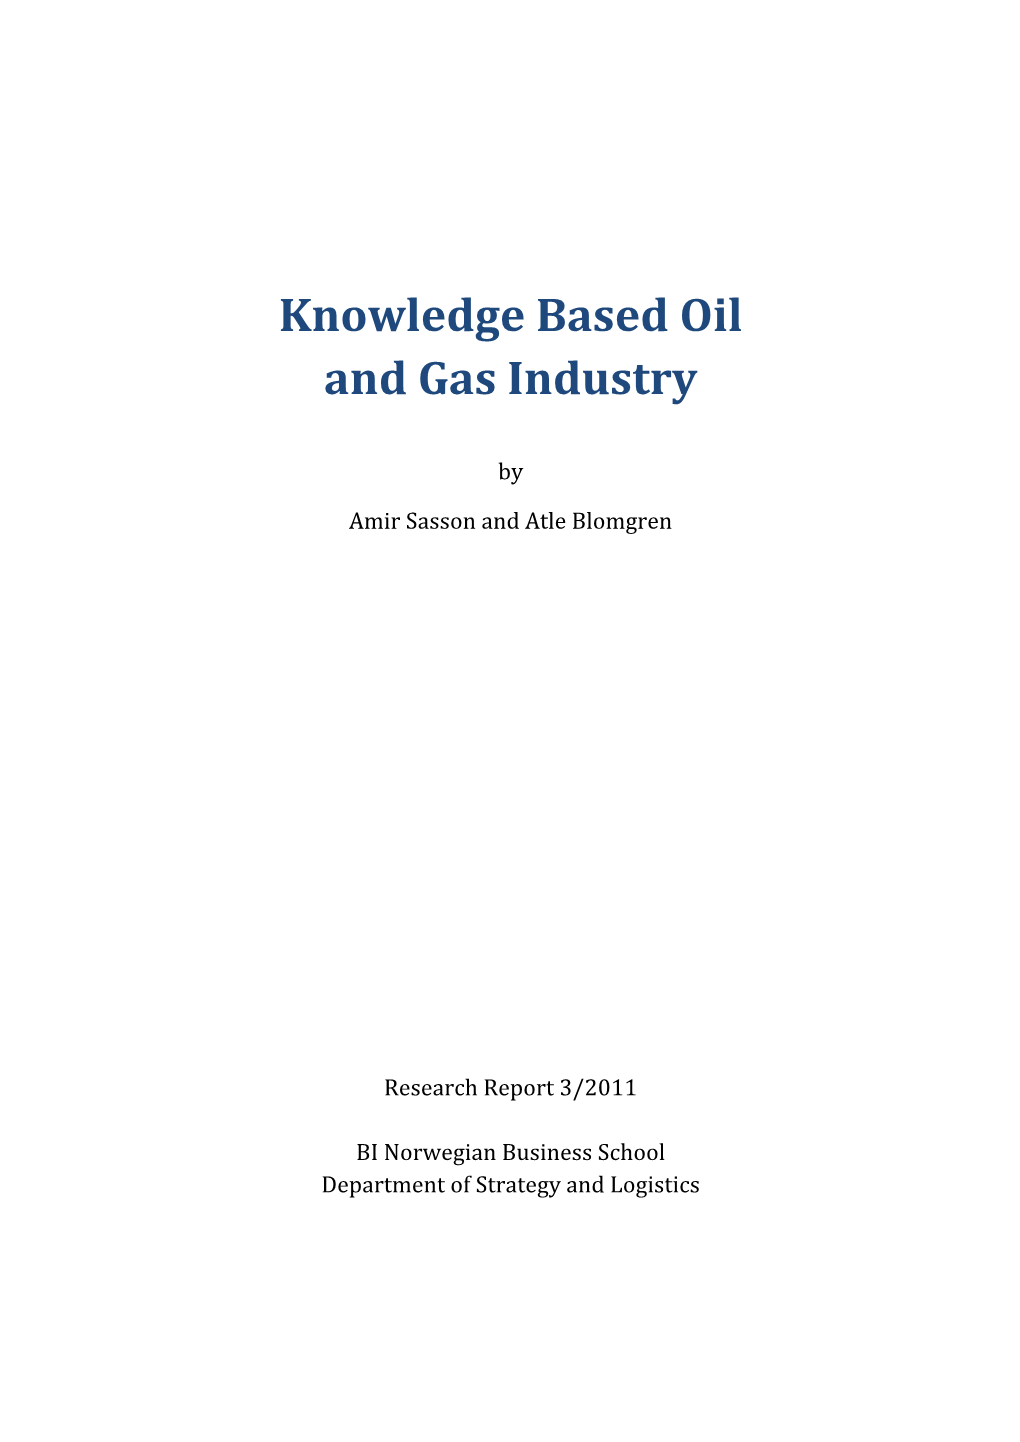 Knowledge Based Oil and Gas Industry